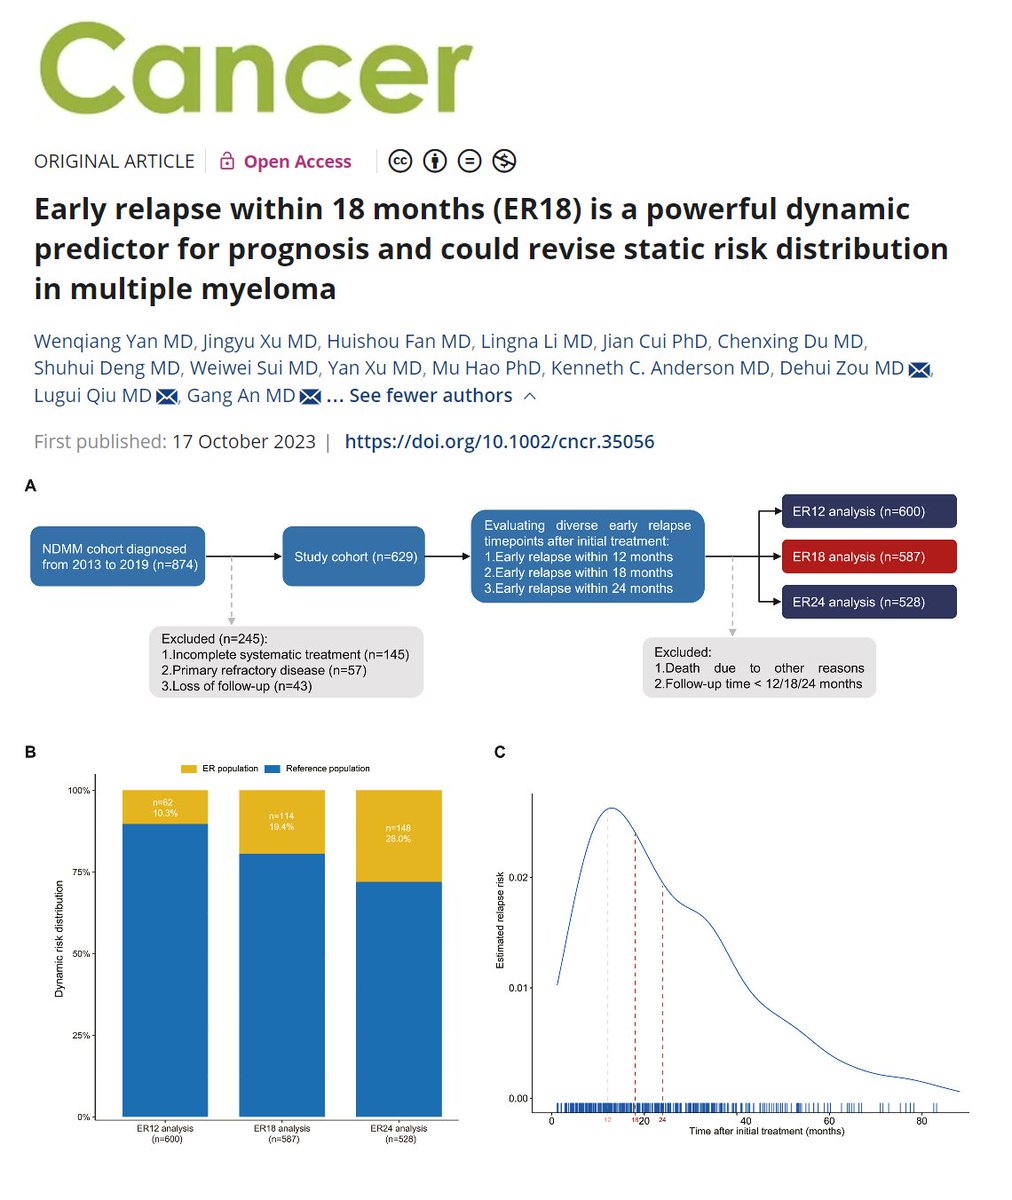 New and #OpenAccess | Early relapse within 18 months is a powerful dynamic predictor for prognosis and could revise static risk distribution in #MultipleMyeloma. acsjournals.onlinelibrary.wiley.com/doi/10.1002/cn… @oncoalert @AjayNookaMD #MMSM